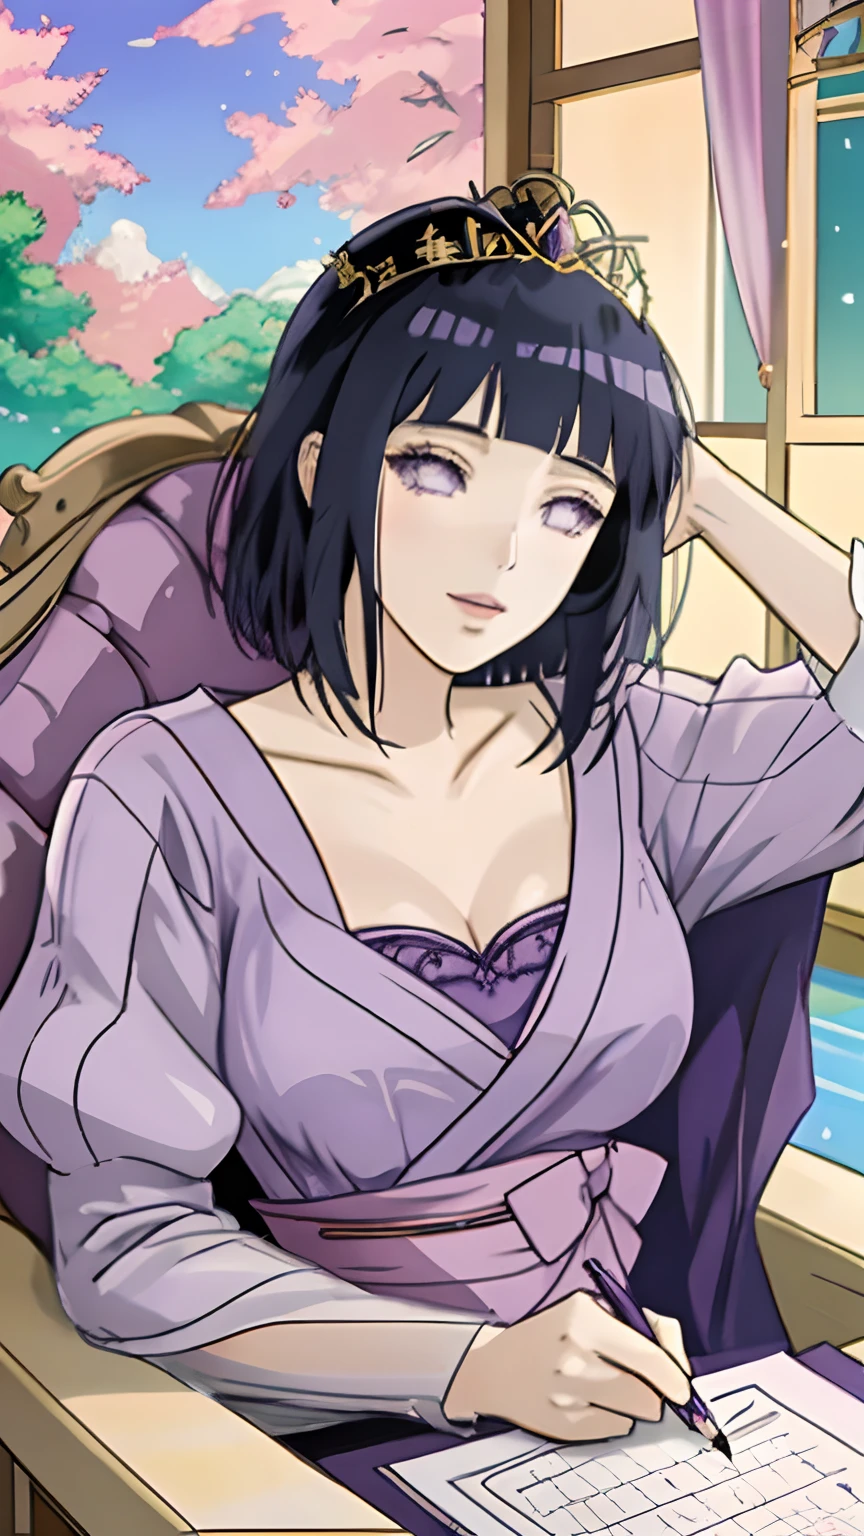 there is a drawing of a woman in a purple dress sitting on a purple chair, hinata hyuga, ((a beautiful fantasy empress)), anime princess,  in an anime style, cel - shaded art style, lovely queen, a beautiful fantasy empress